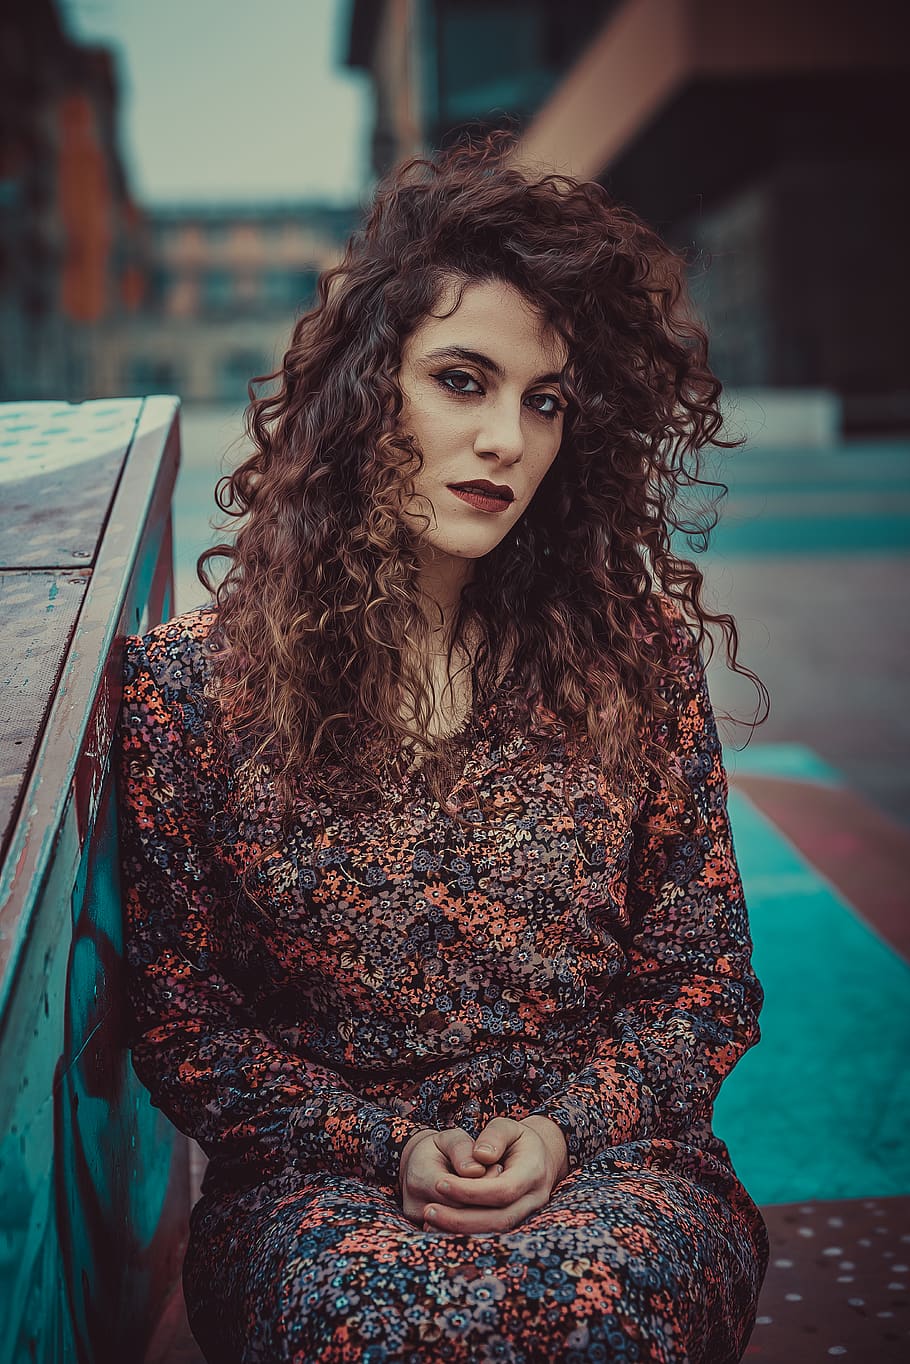 Photo of Woman Wearing Floral Dress, beautiful woman, curly hair